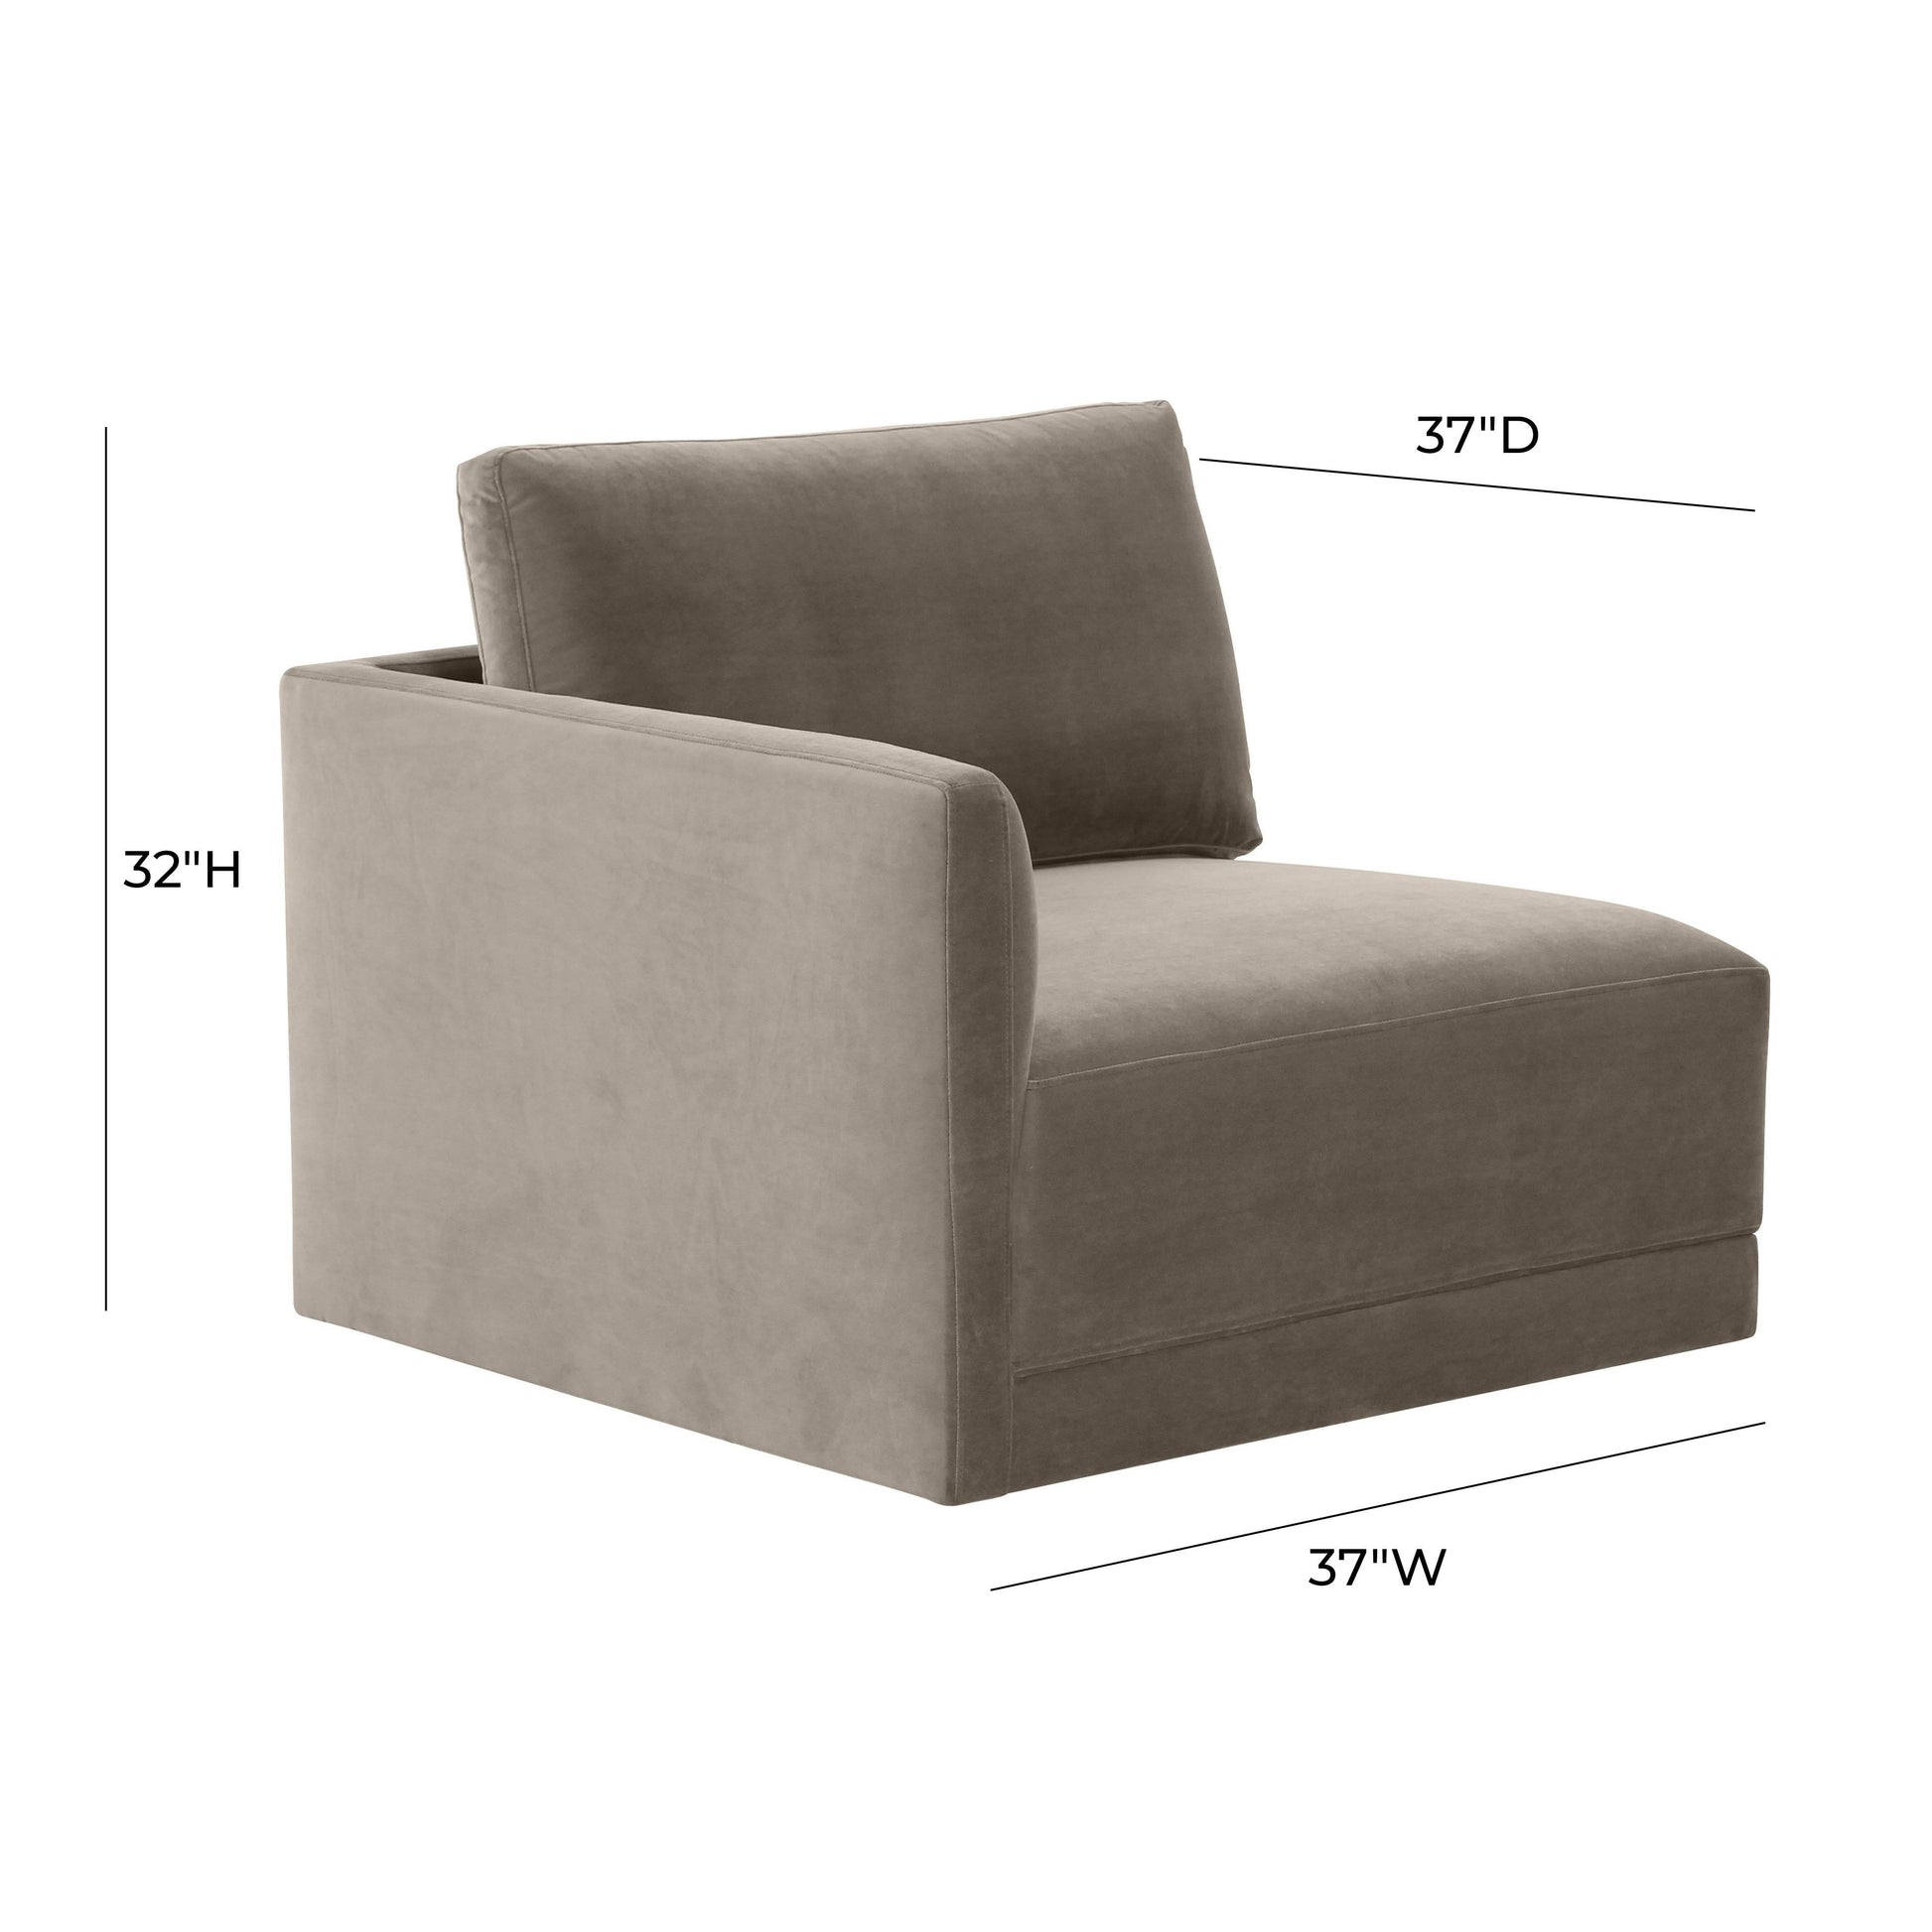 Willow Taupe Laf Corner Chair by TOV